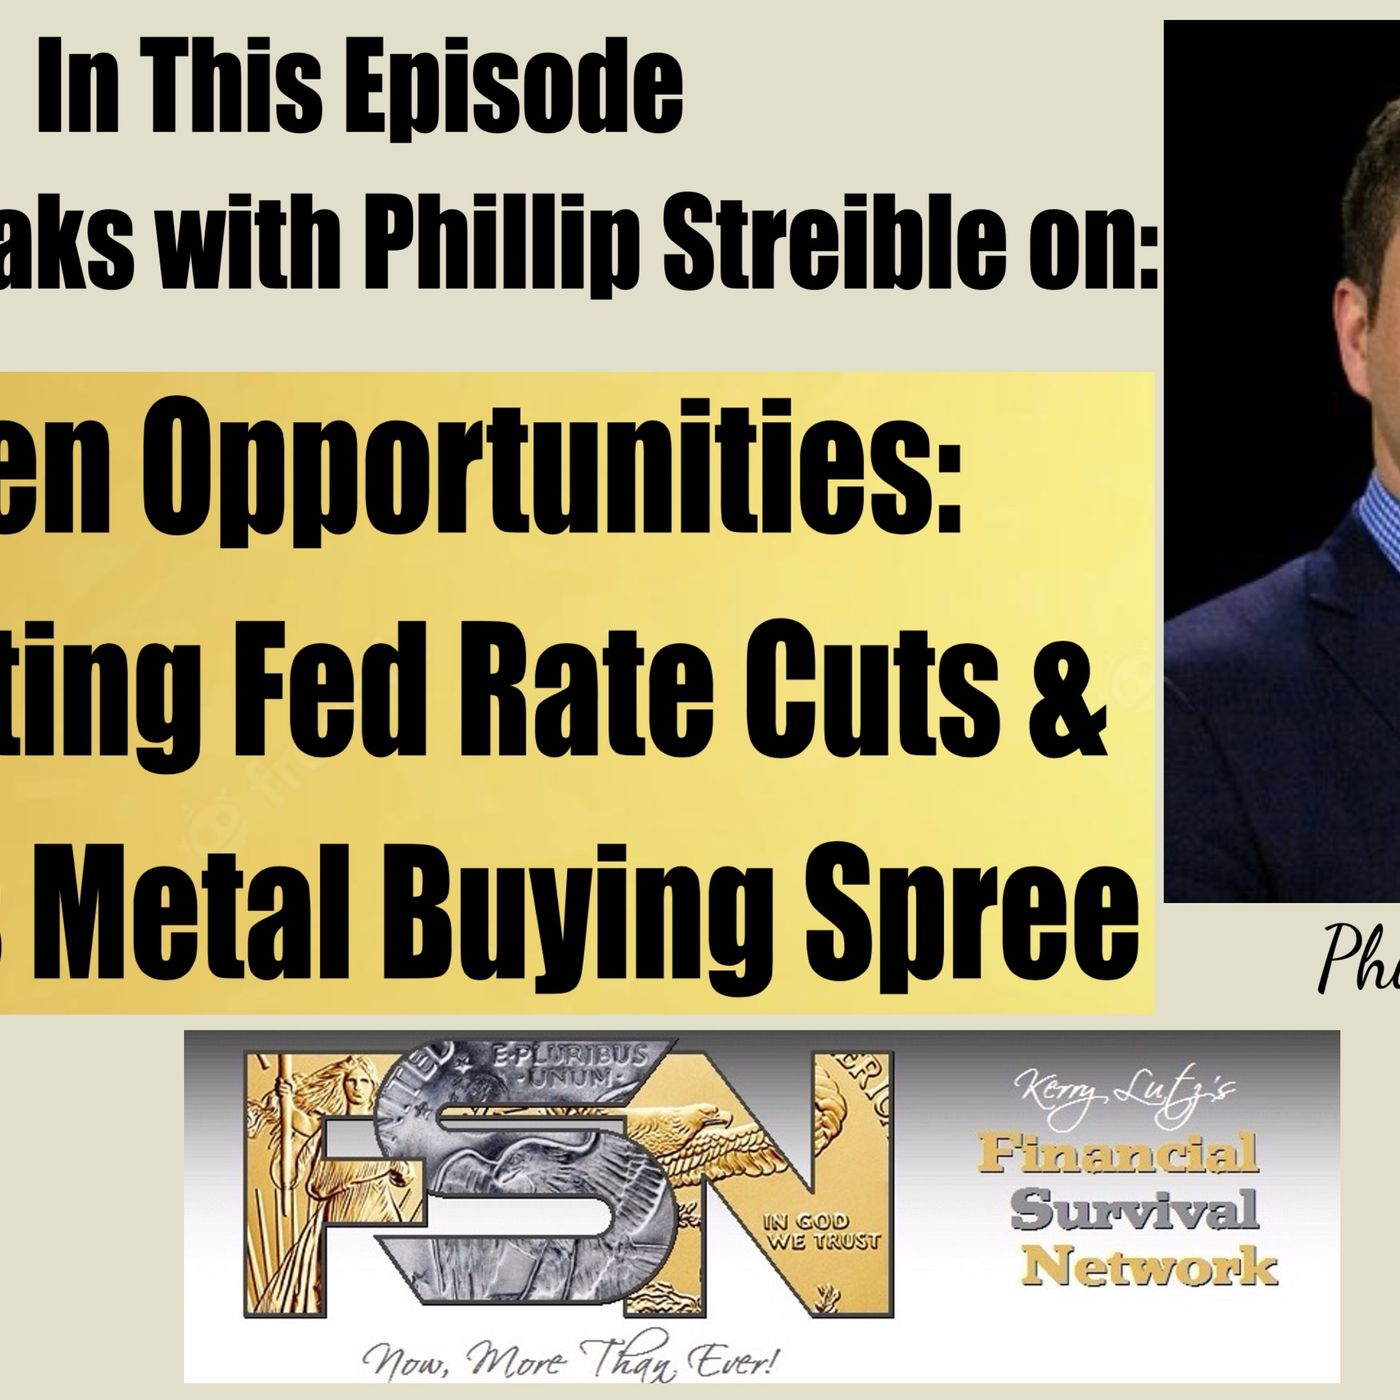 Golden Opportunities: Navigating Fed Rate Cuts and China's Metal Buying Spree -   Phillip Streible  #6062